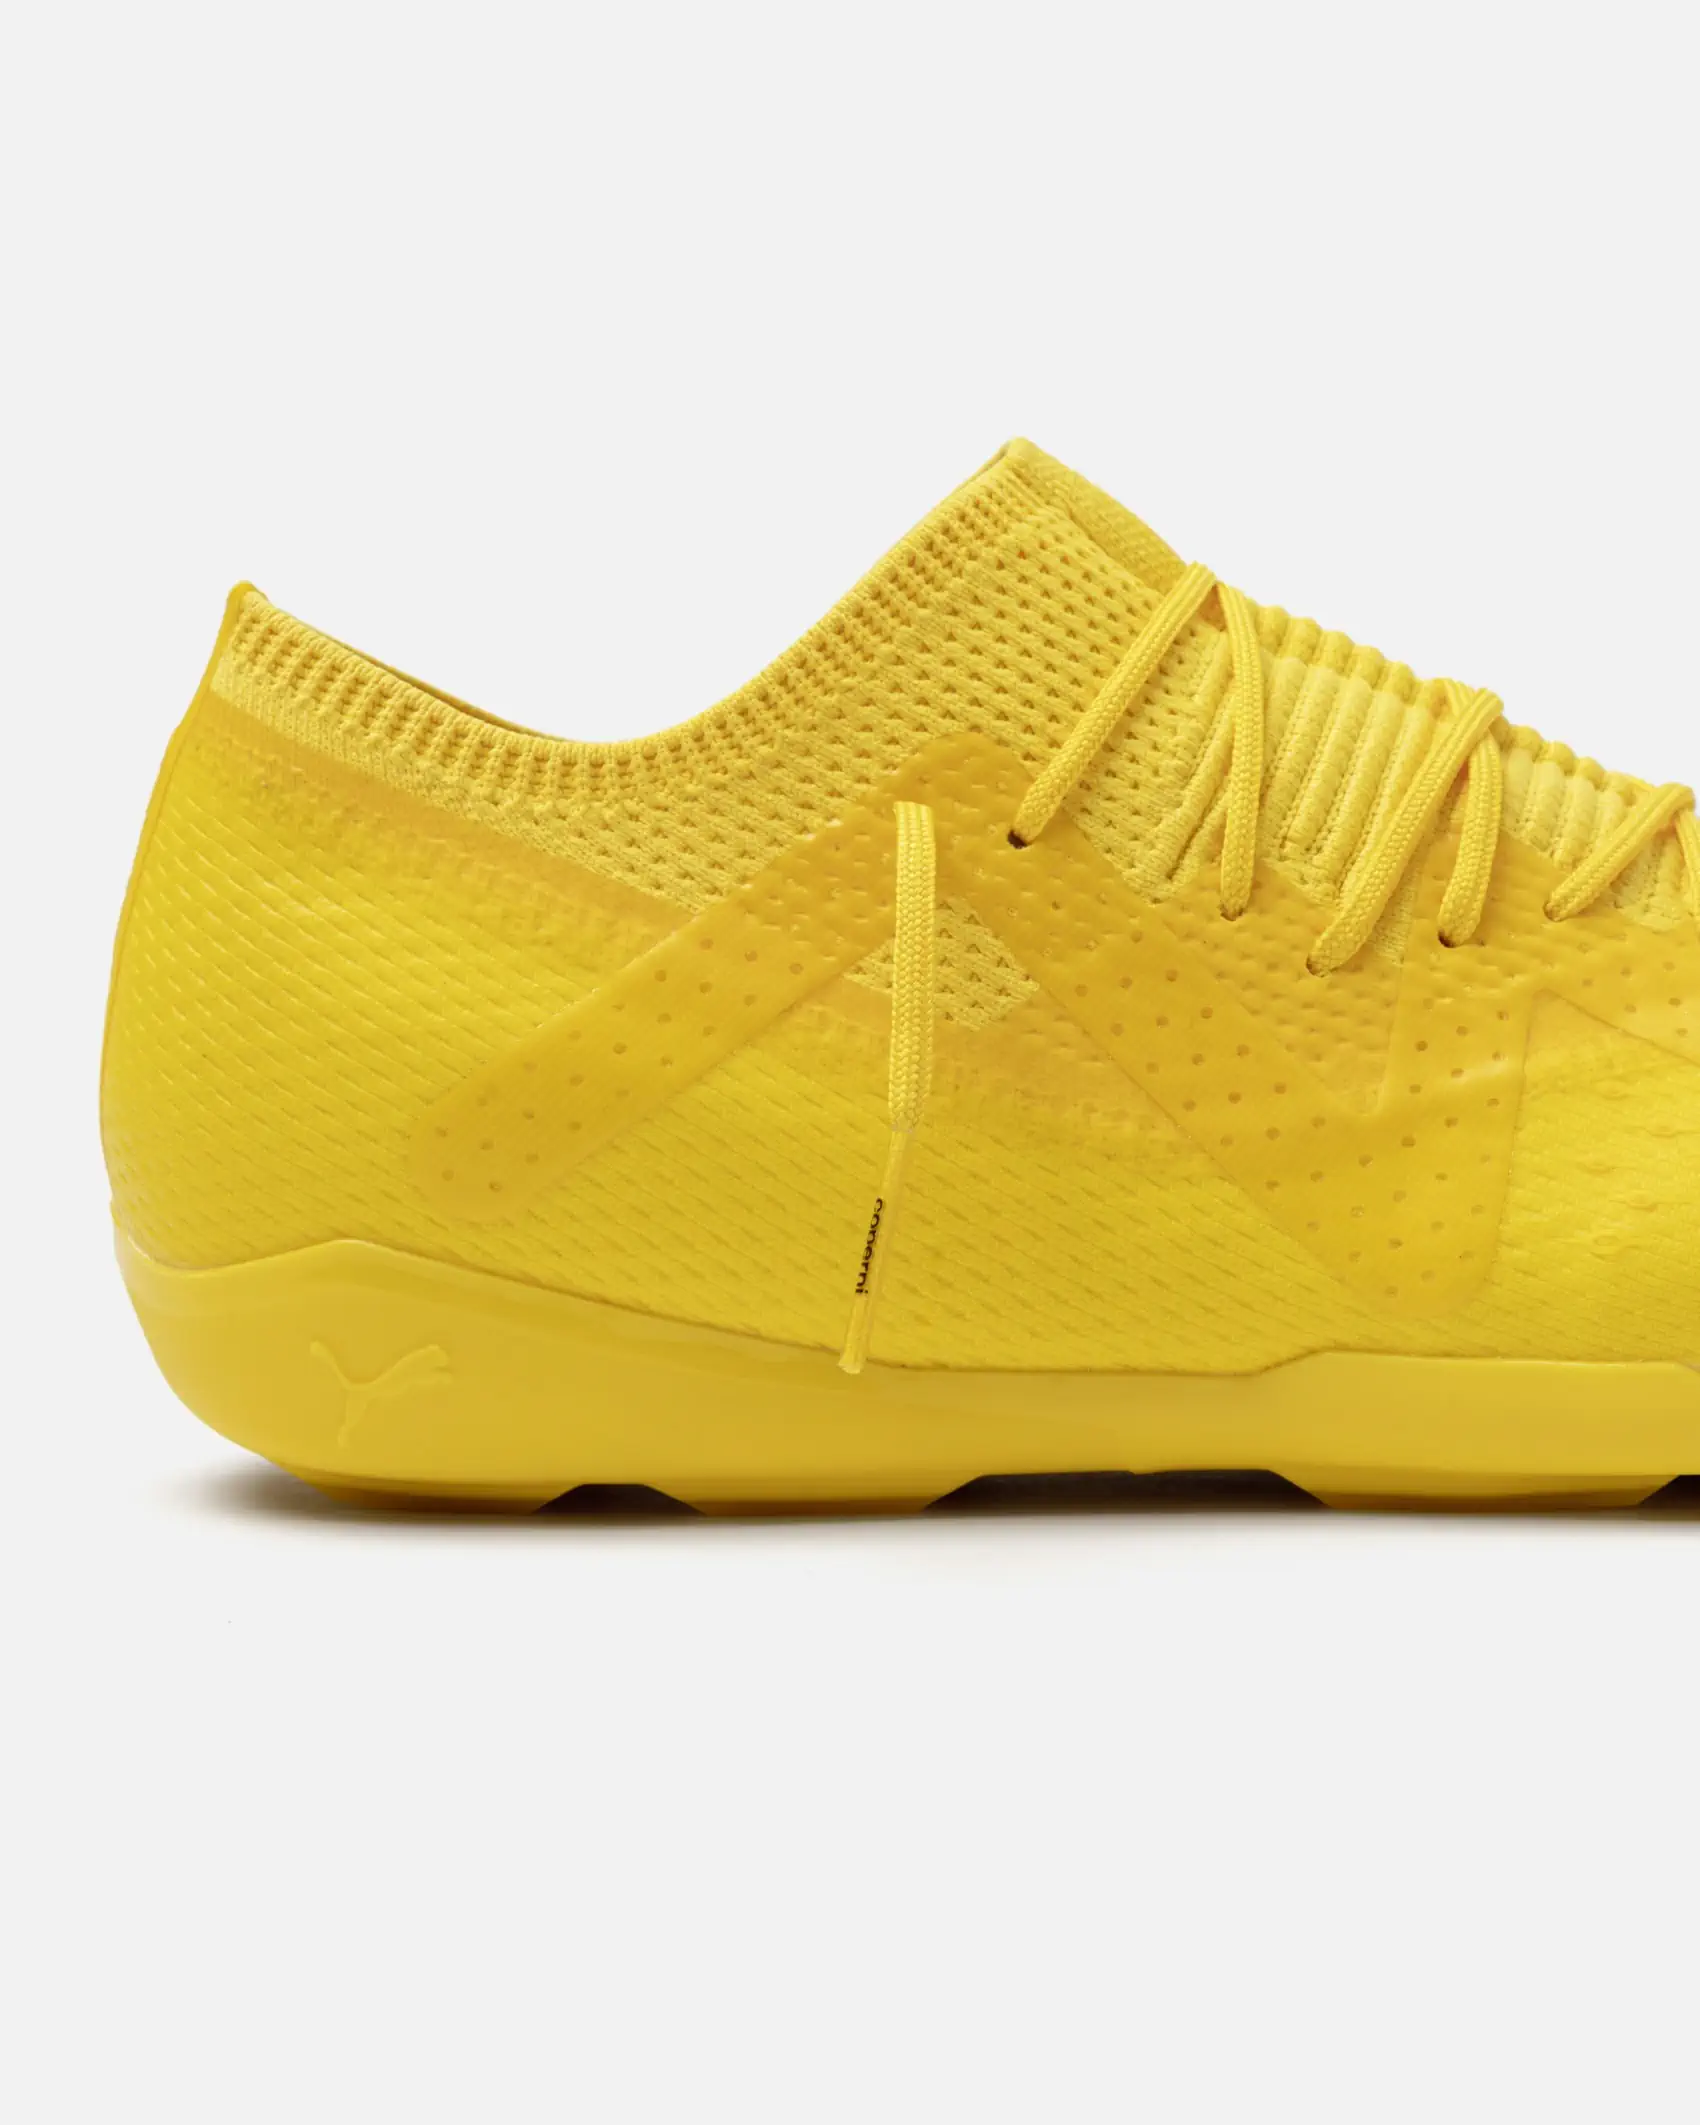 PUMA and COPERNI Push the Limits of Footwear Design with the Revolutionary 90SQR